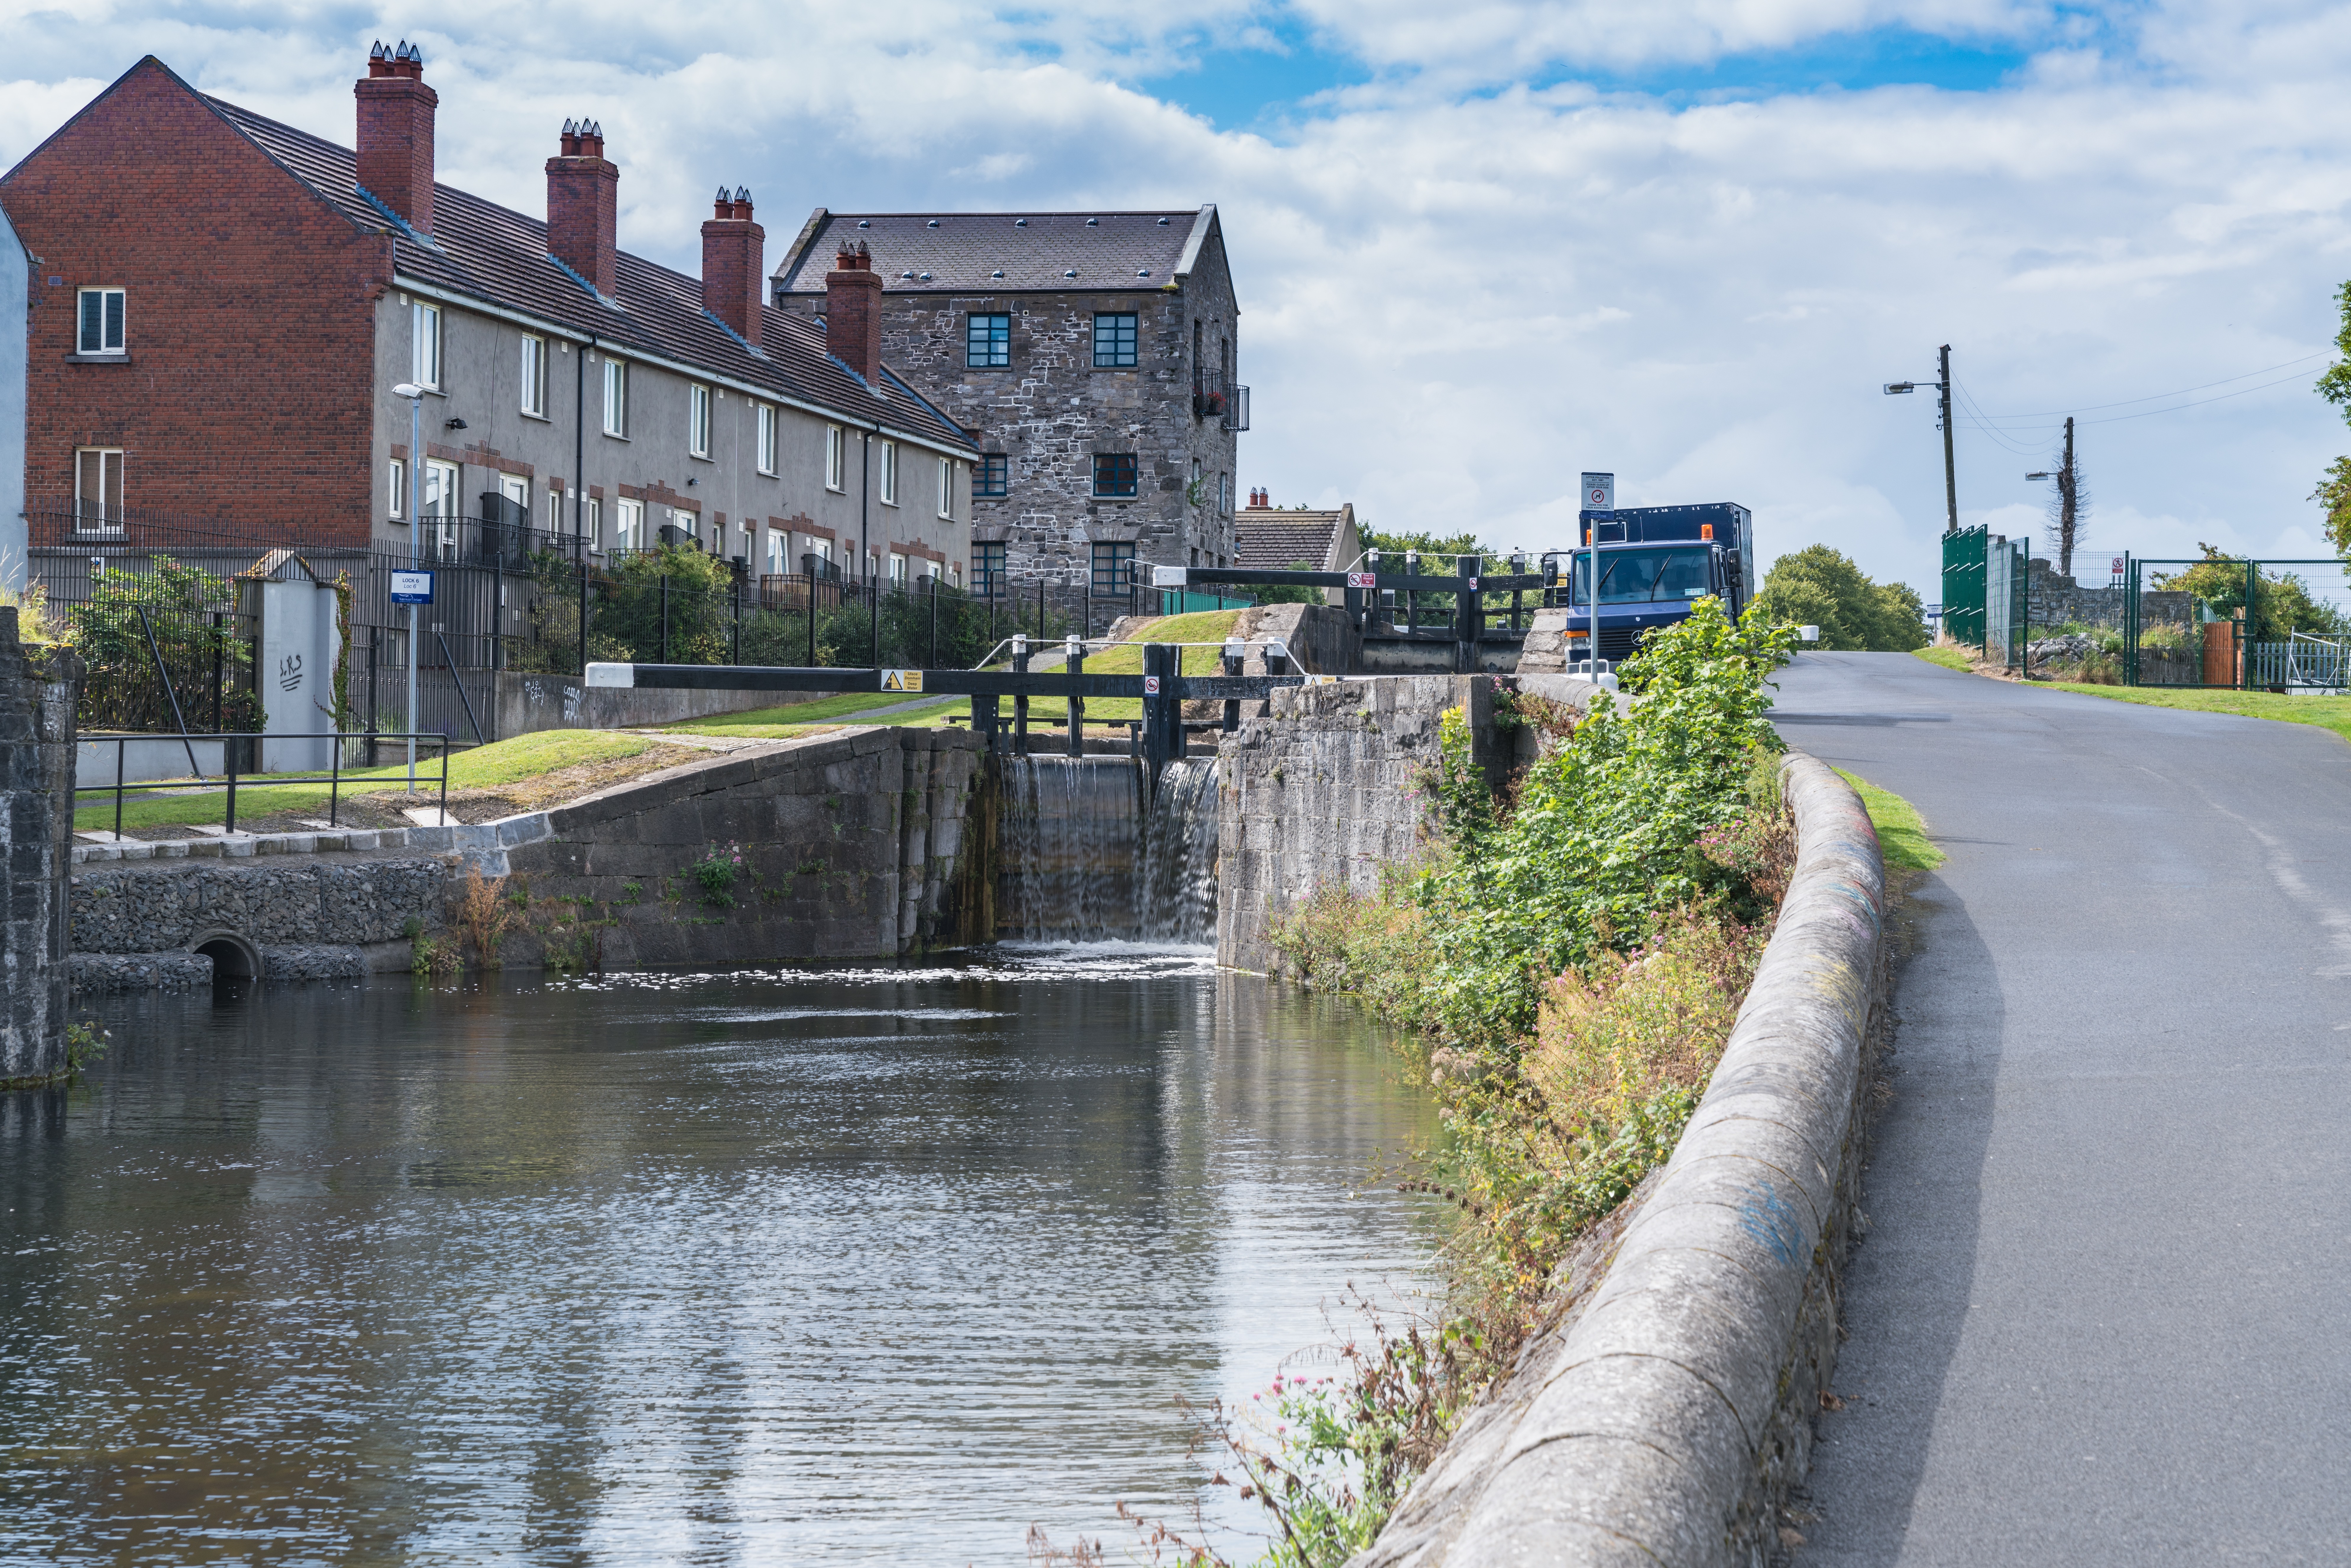  ROYAL CANAL - CABRA AREA 020 